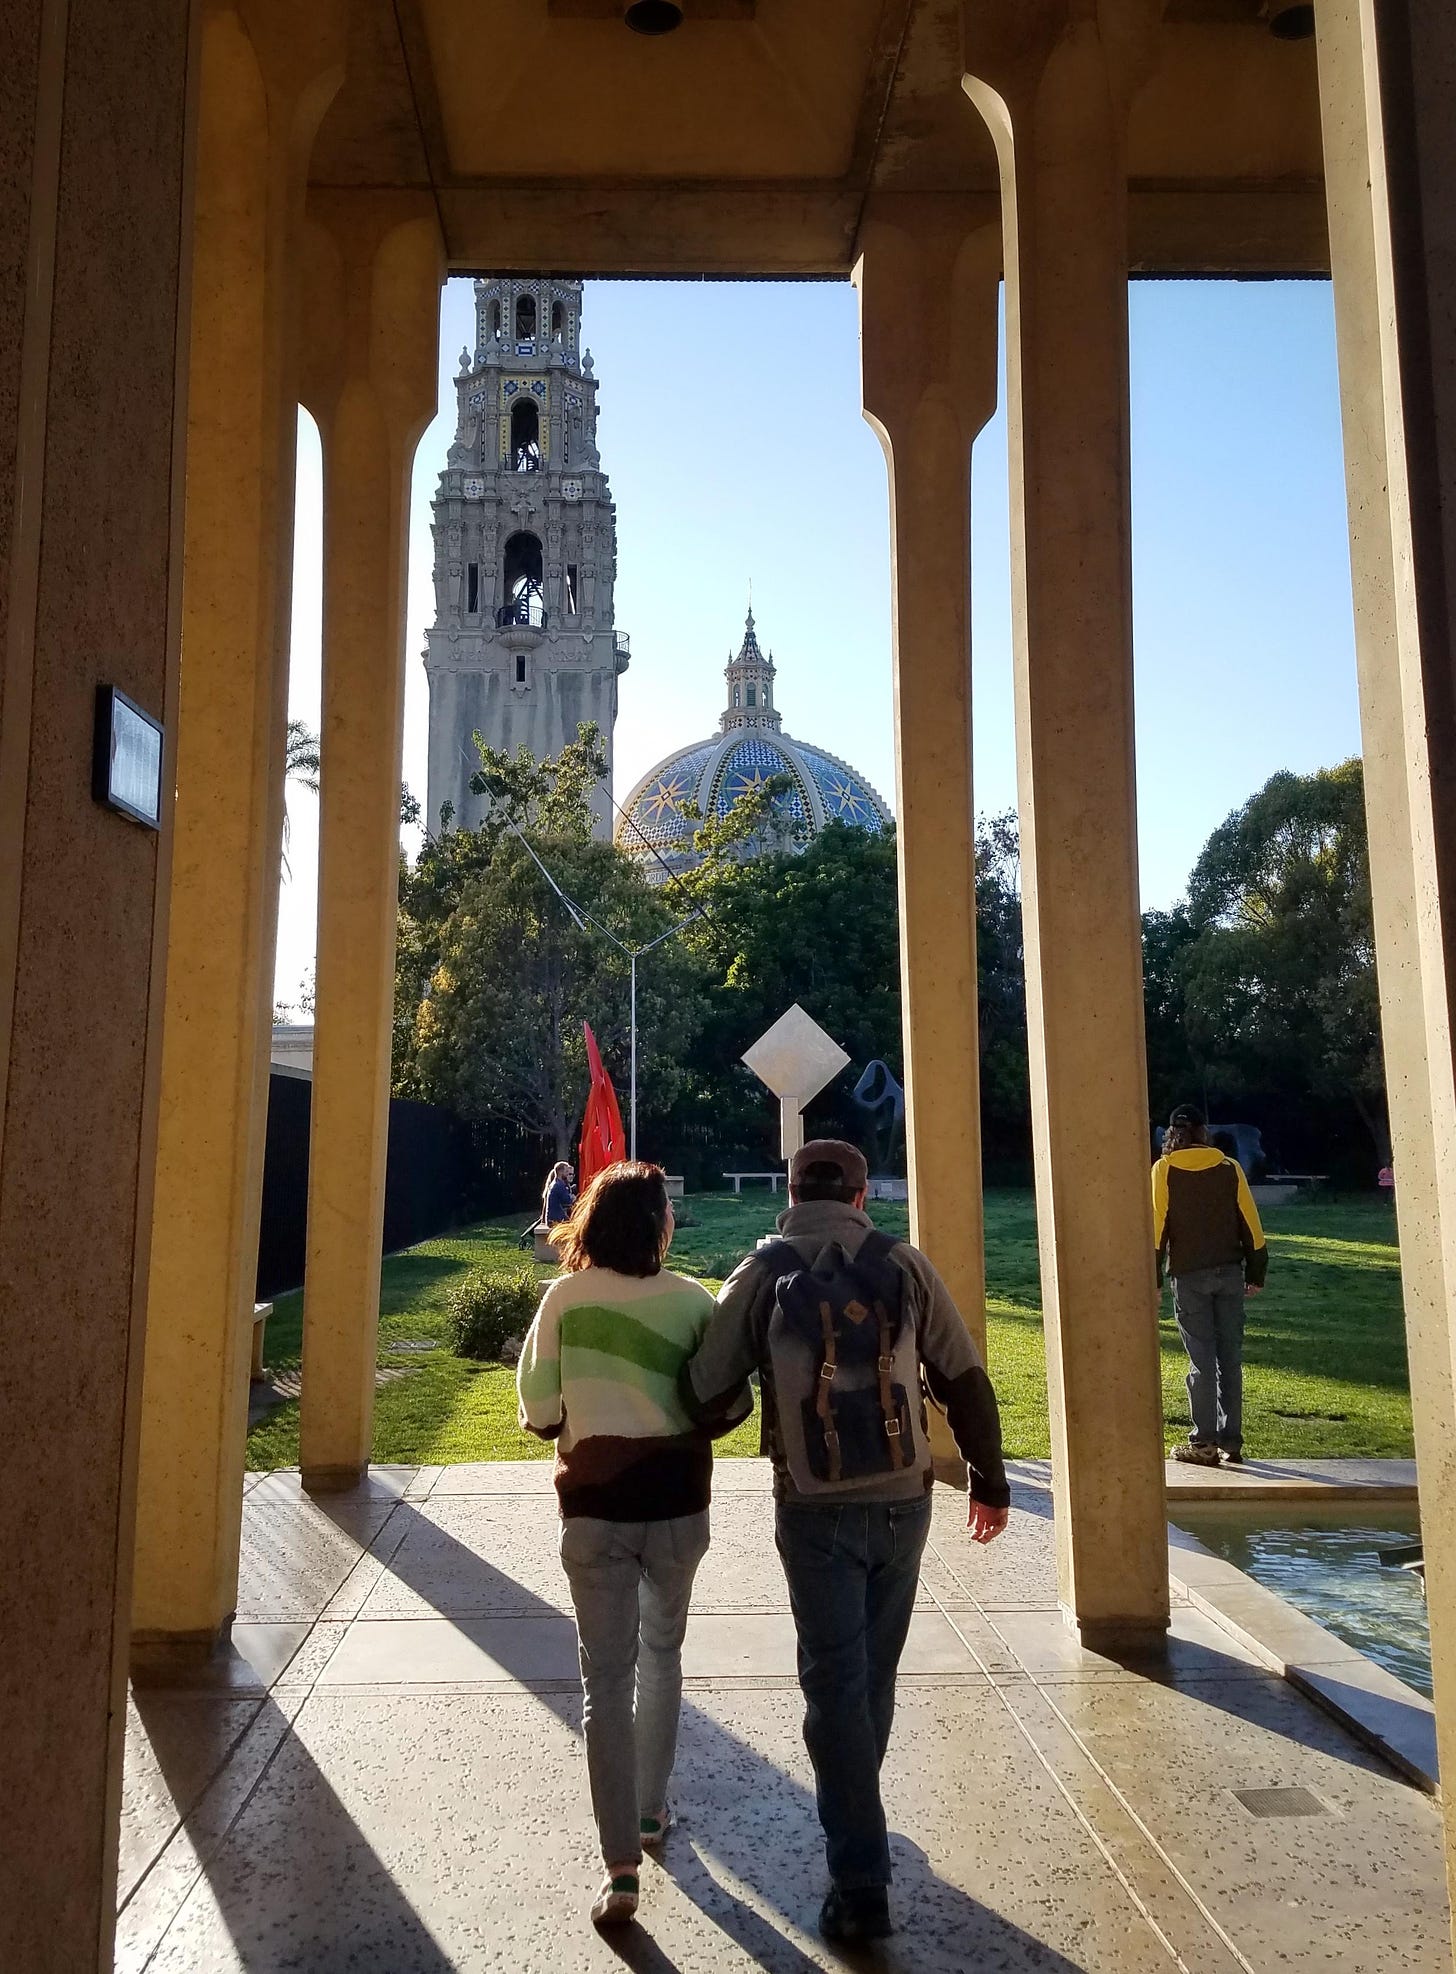 Two people walk arm-in-arm through a corridor leading to a sculpture garden on a lawn, with a domed building and tall bell tower in the background. The person on the left is a petite woman with dark hair and a striped green sweater and jeans; on the right is a man wearing a brown cap, backpack, grey fleece, and jeans. They're walking away from the camera